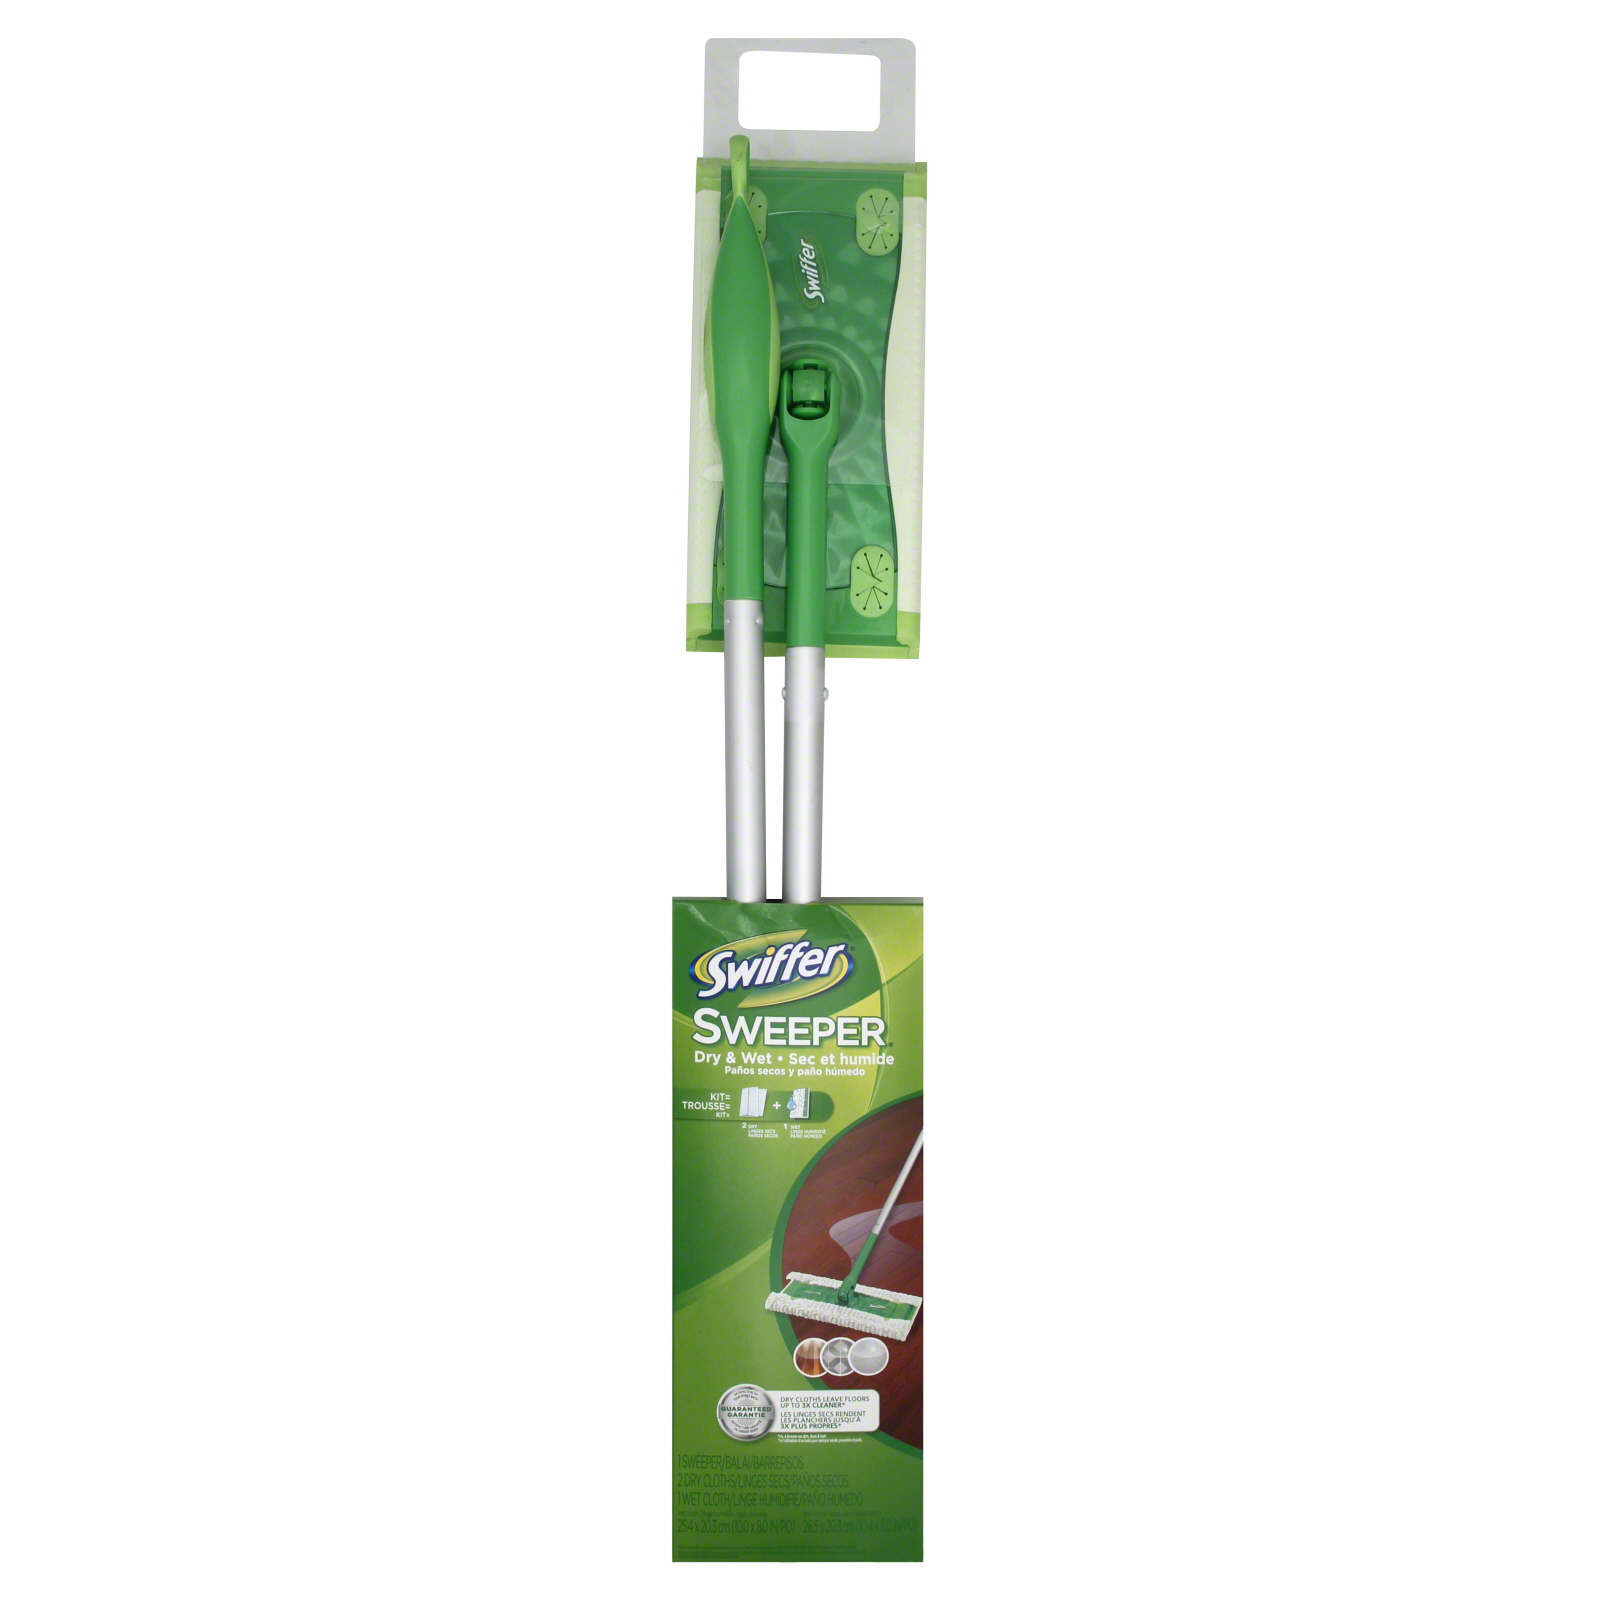 Swiffer Sweeper Sk  Out Of Box, 1 ct